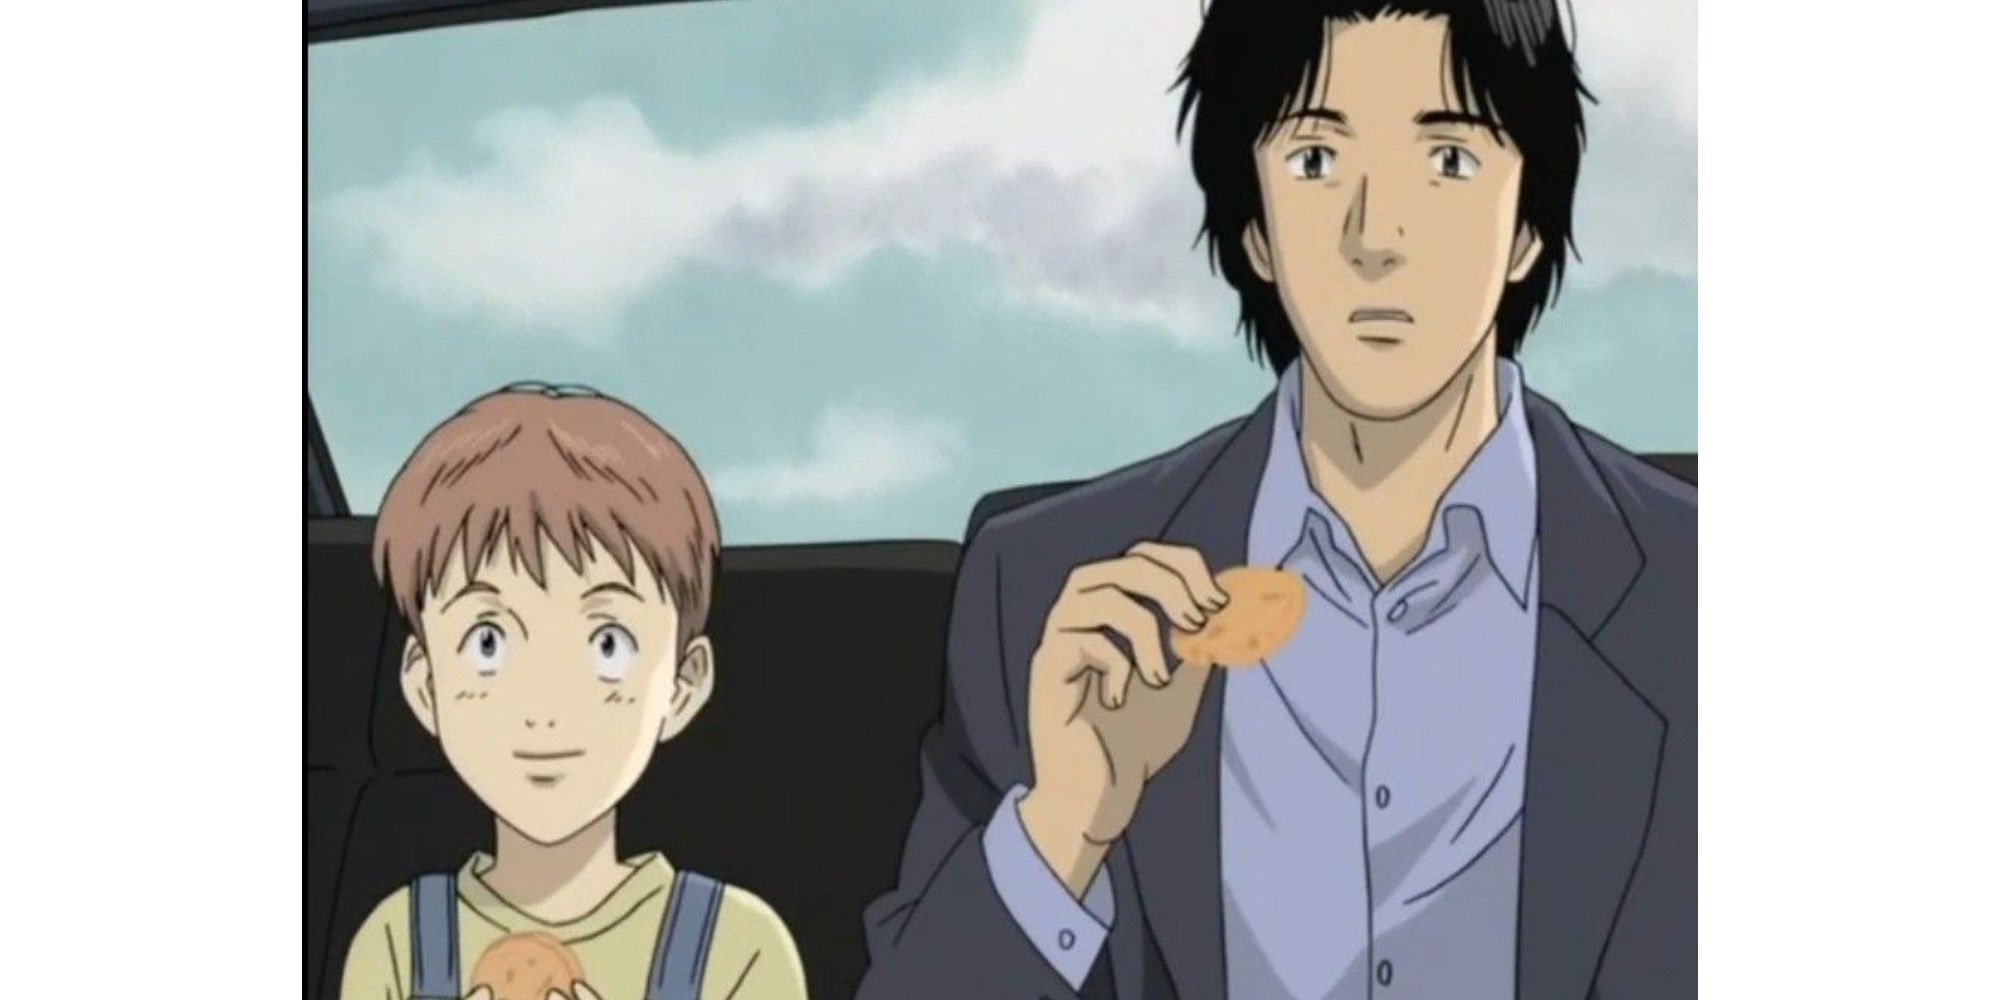 Tenma (left) and Dieter (right) from the anime Monster. 